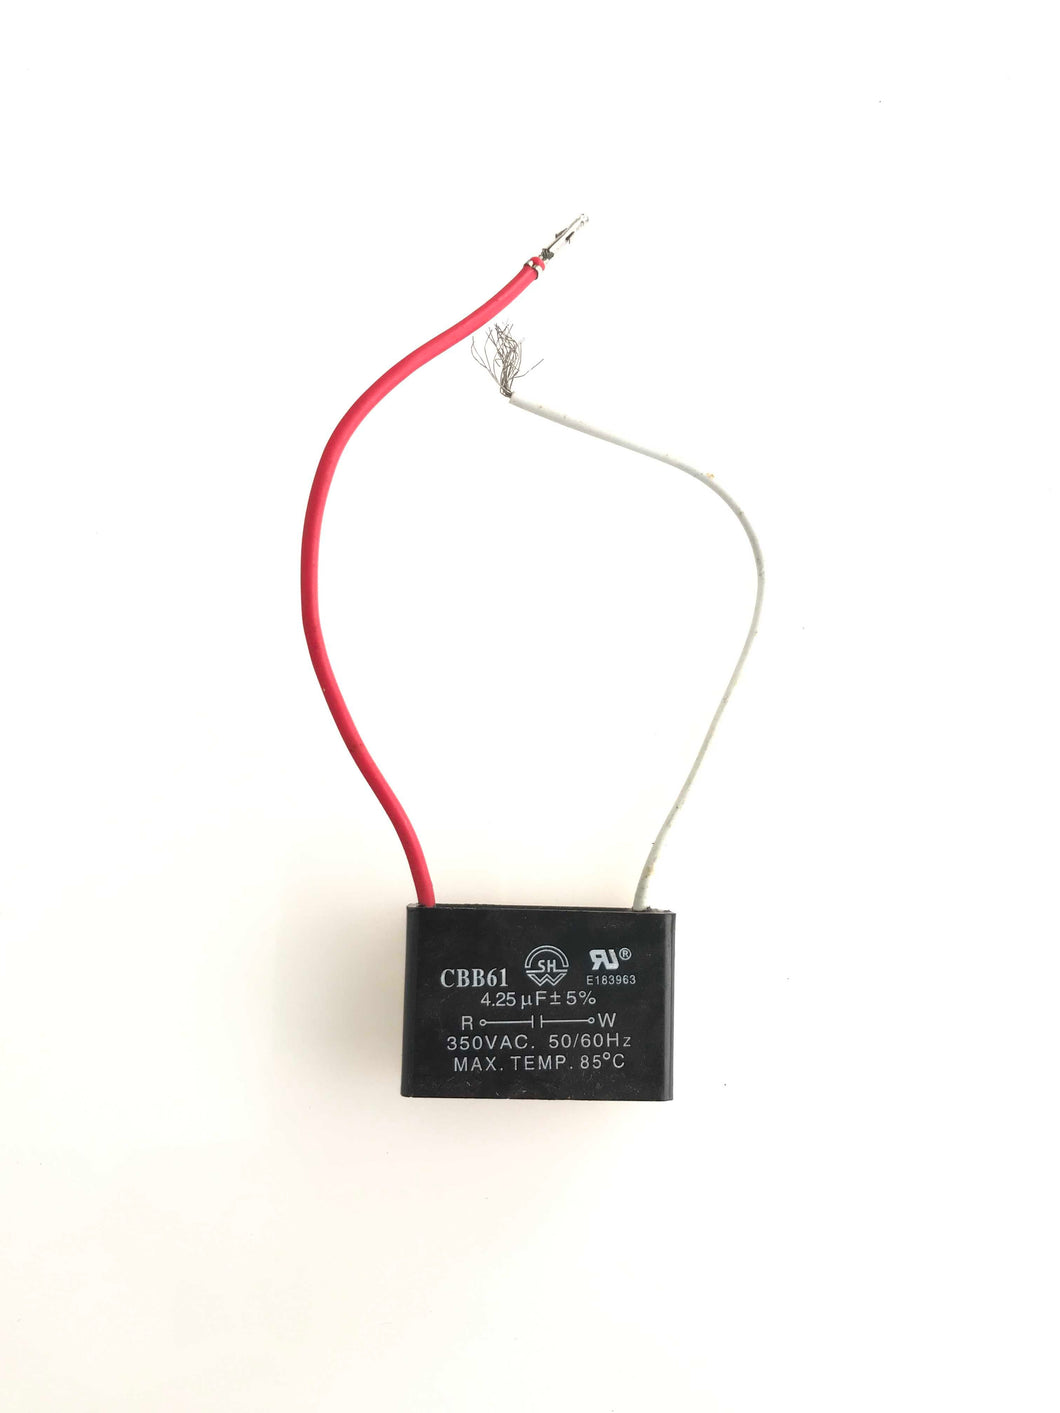 Capacitor - 2 wire (Red and White)